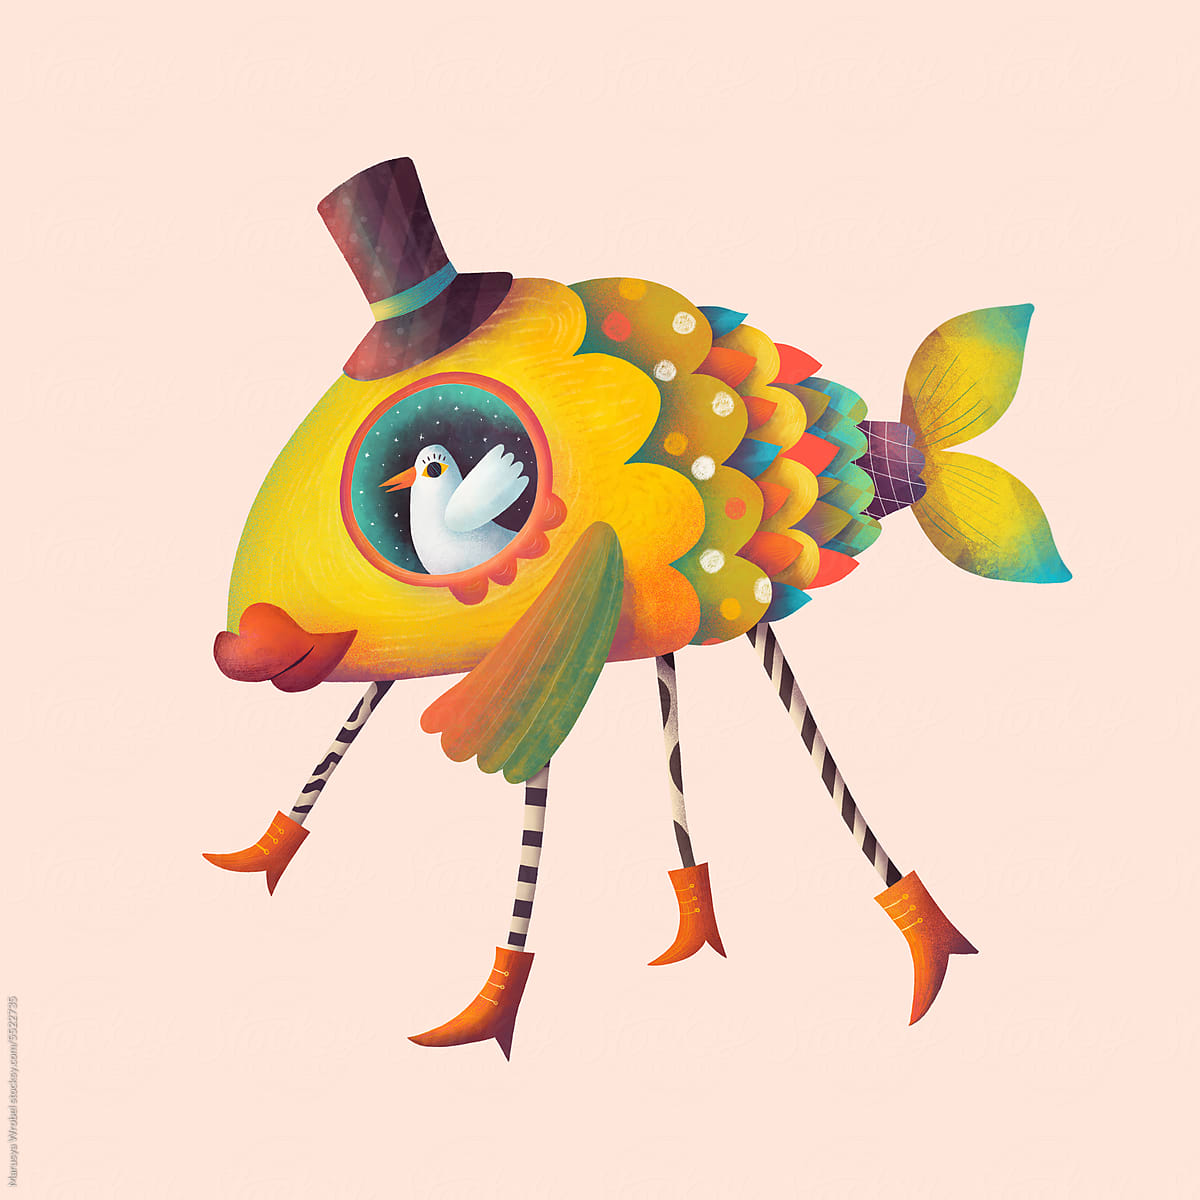 Fairy circus character fish with legs